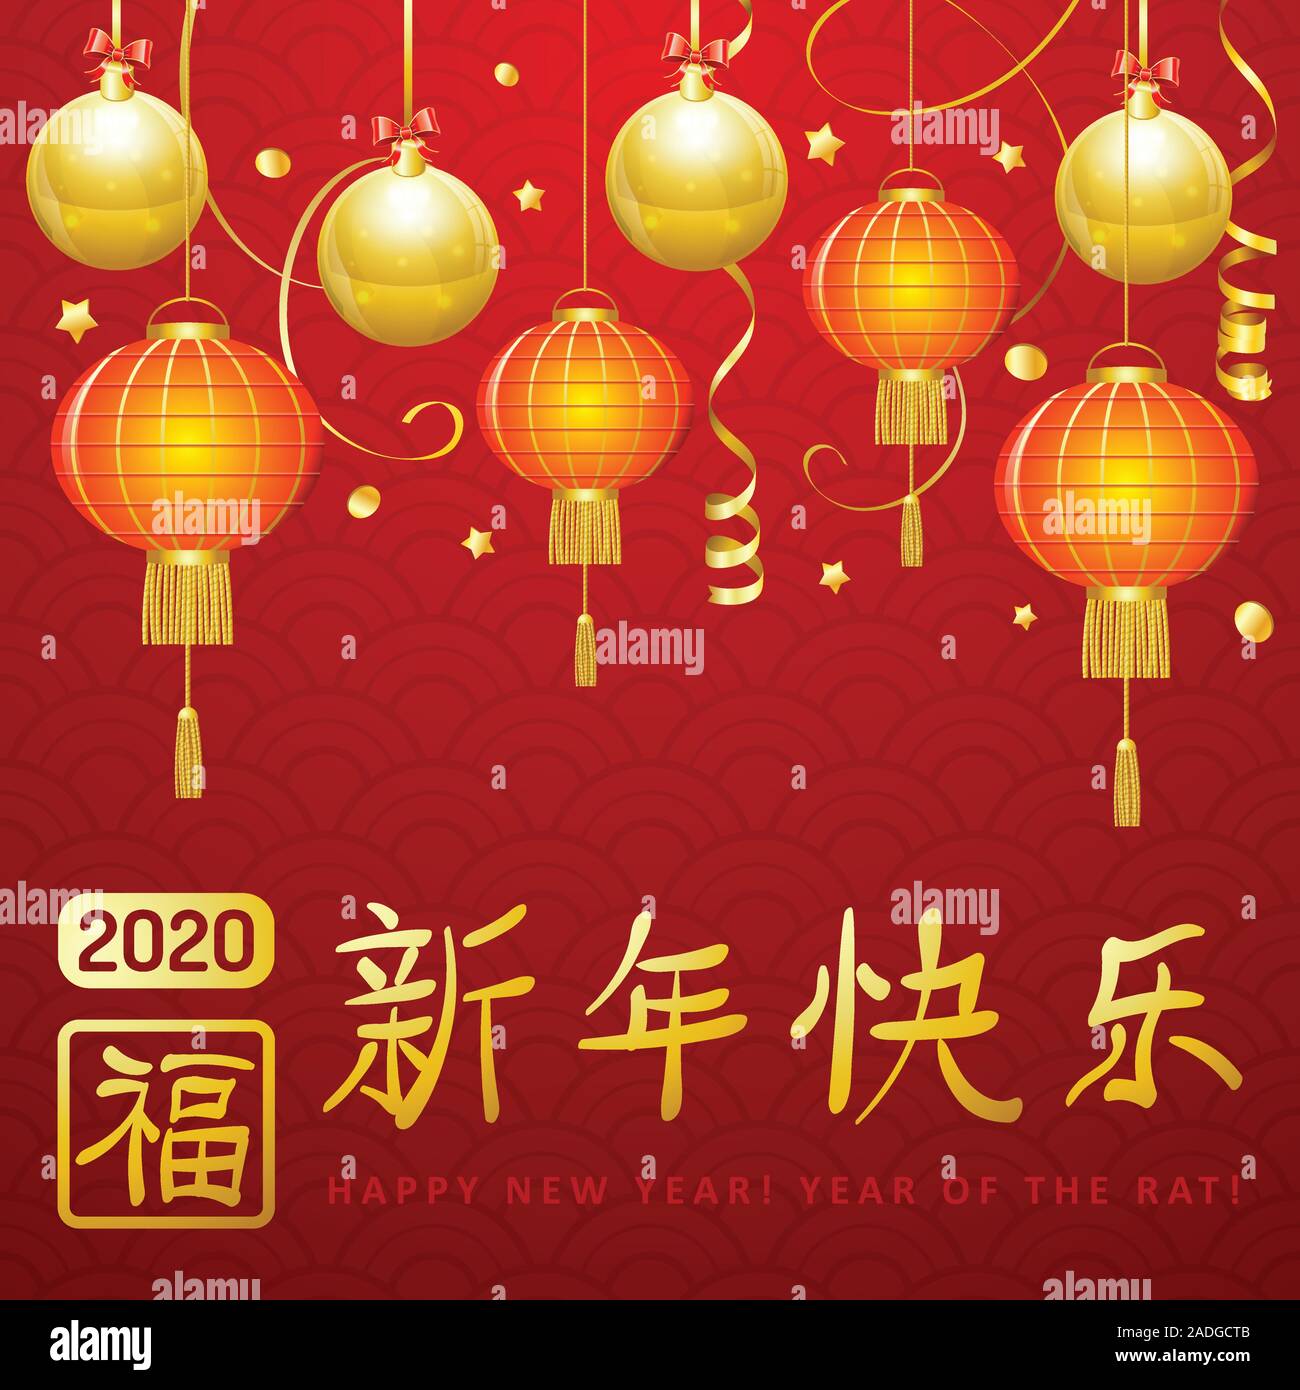 Chinese New Year 2020 Poster Stock Vector